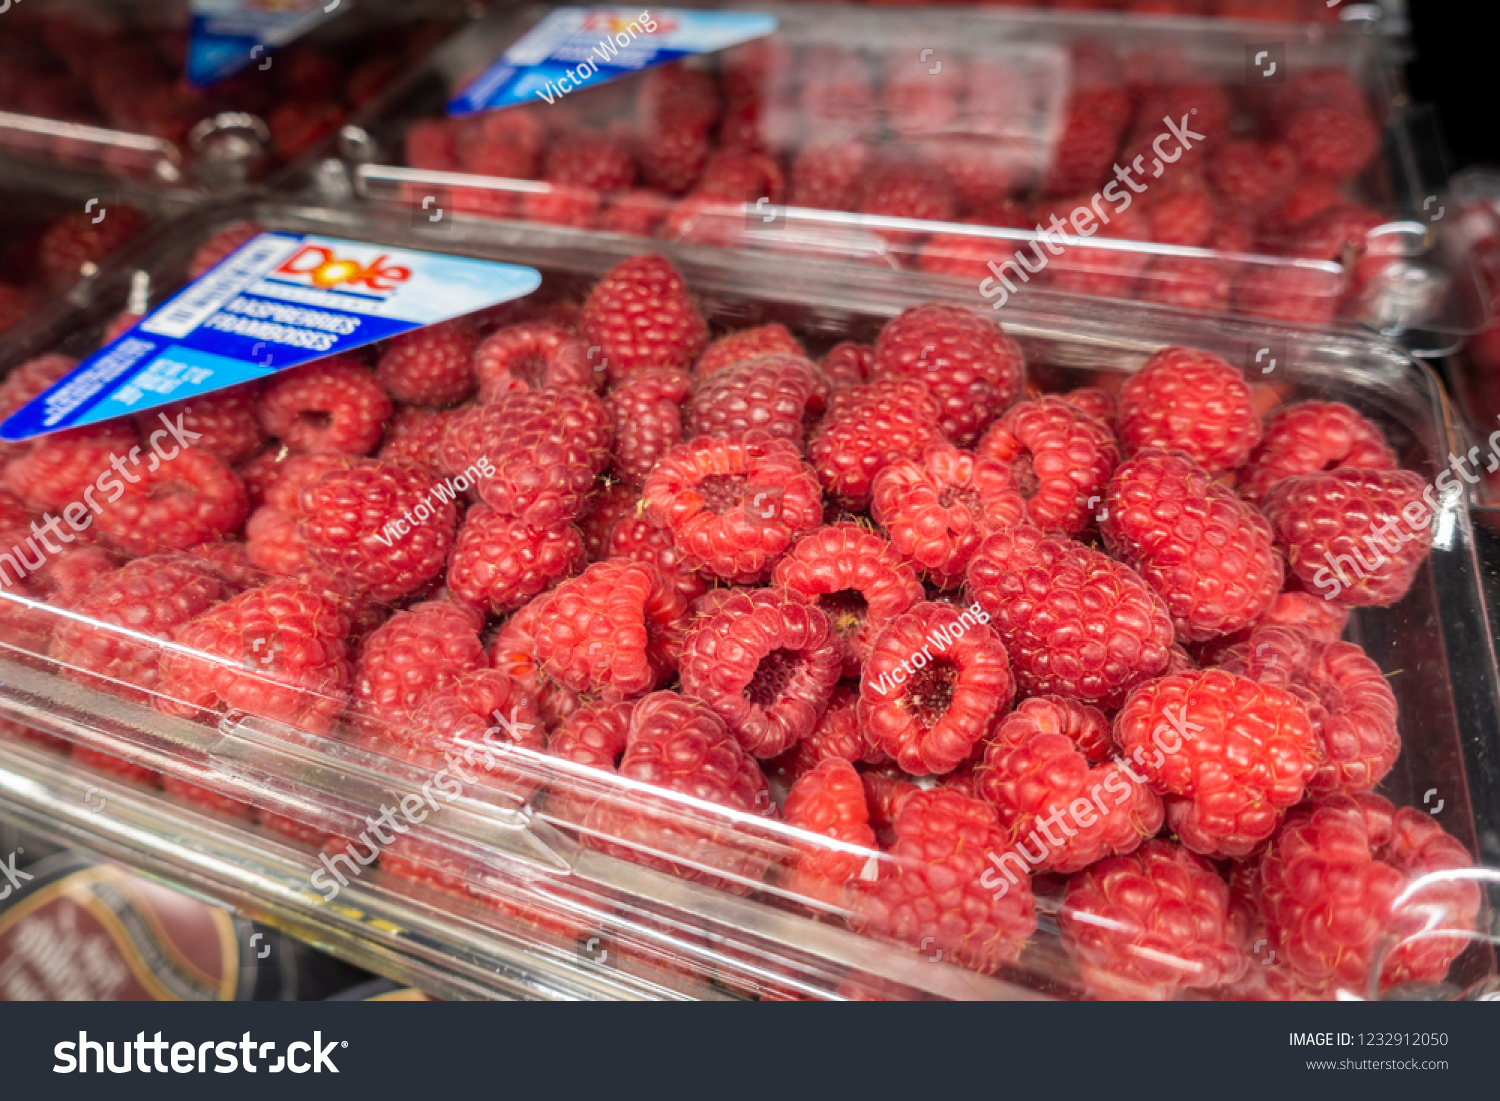 New Orleans, USA - Dec 3, 2017: Ripe raspberries packaged on display for sale at the Hong Kong Food Market shopping center. These are organized on a shelf with product details. #1232912050